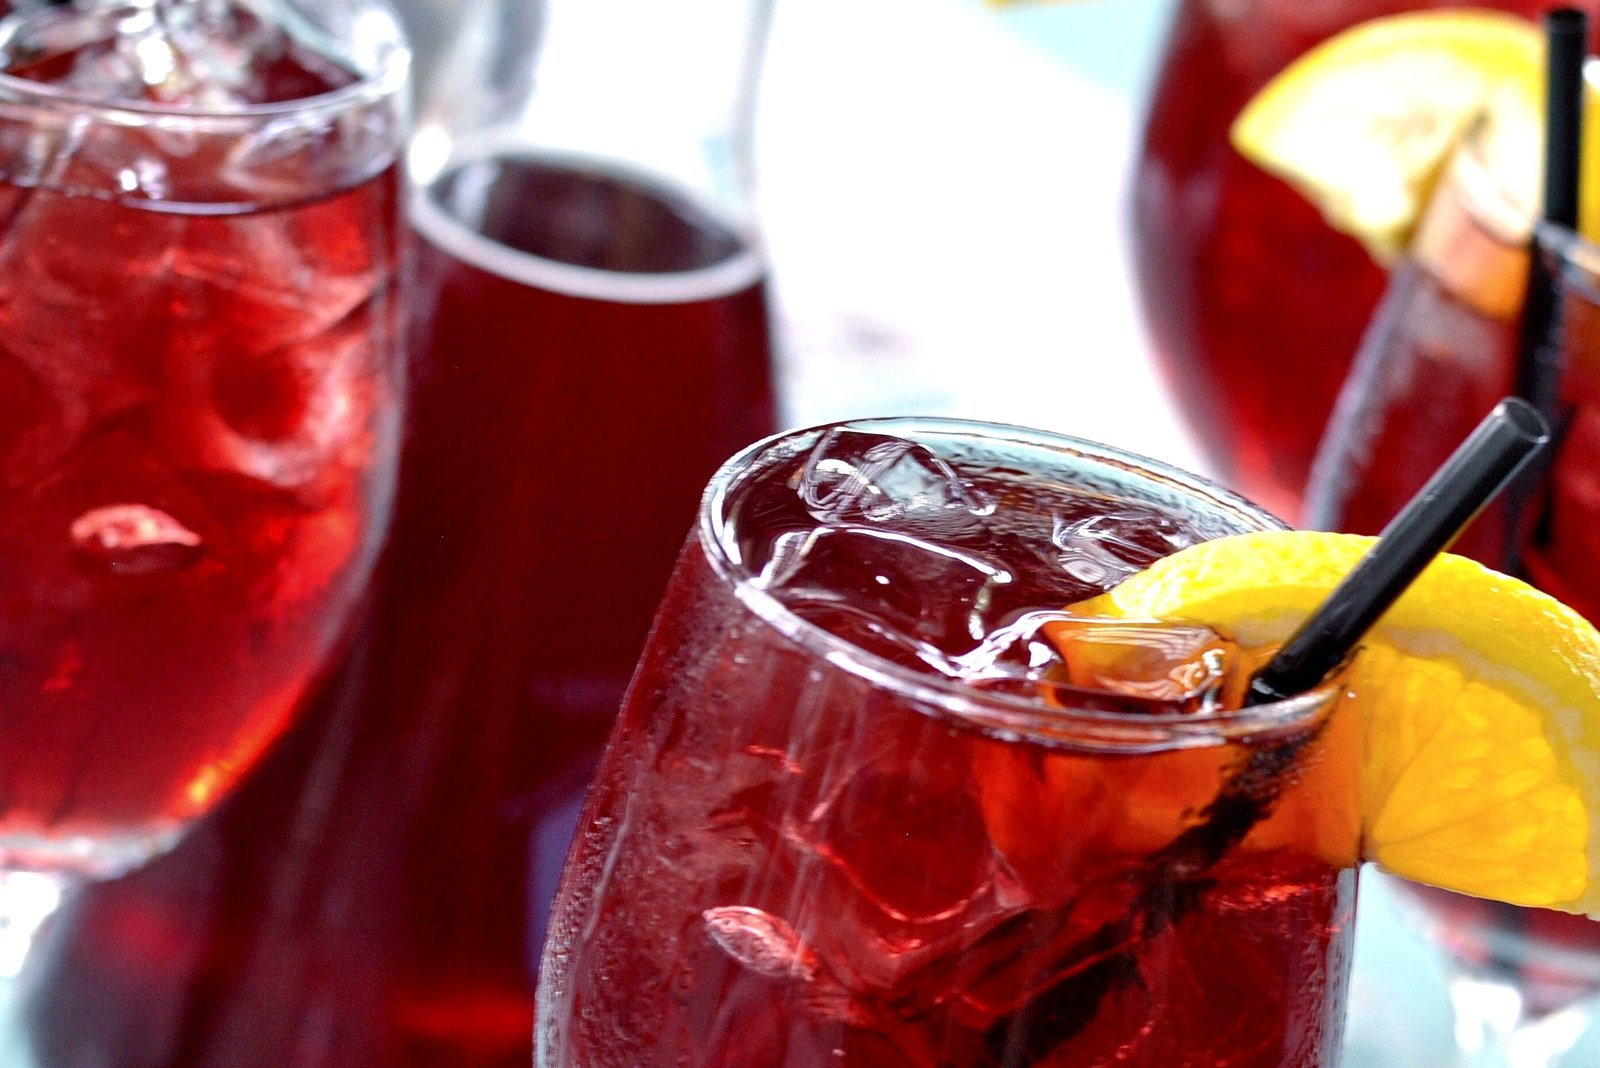 How to try Tinto de Verano in Seville